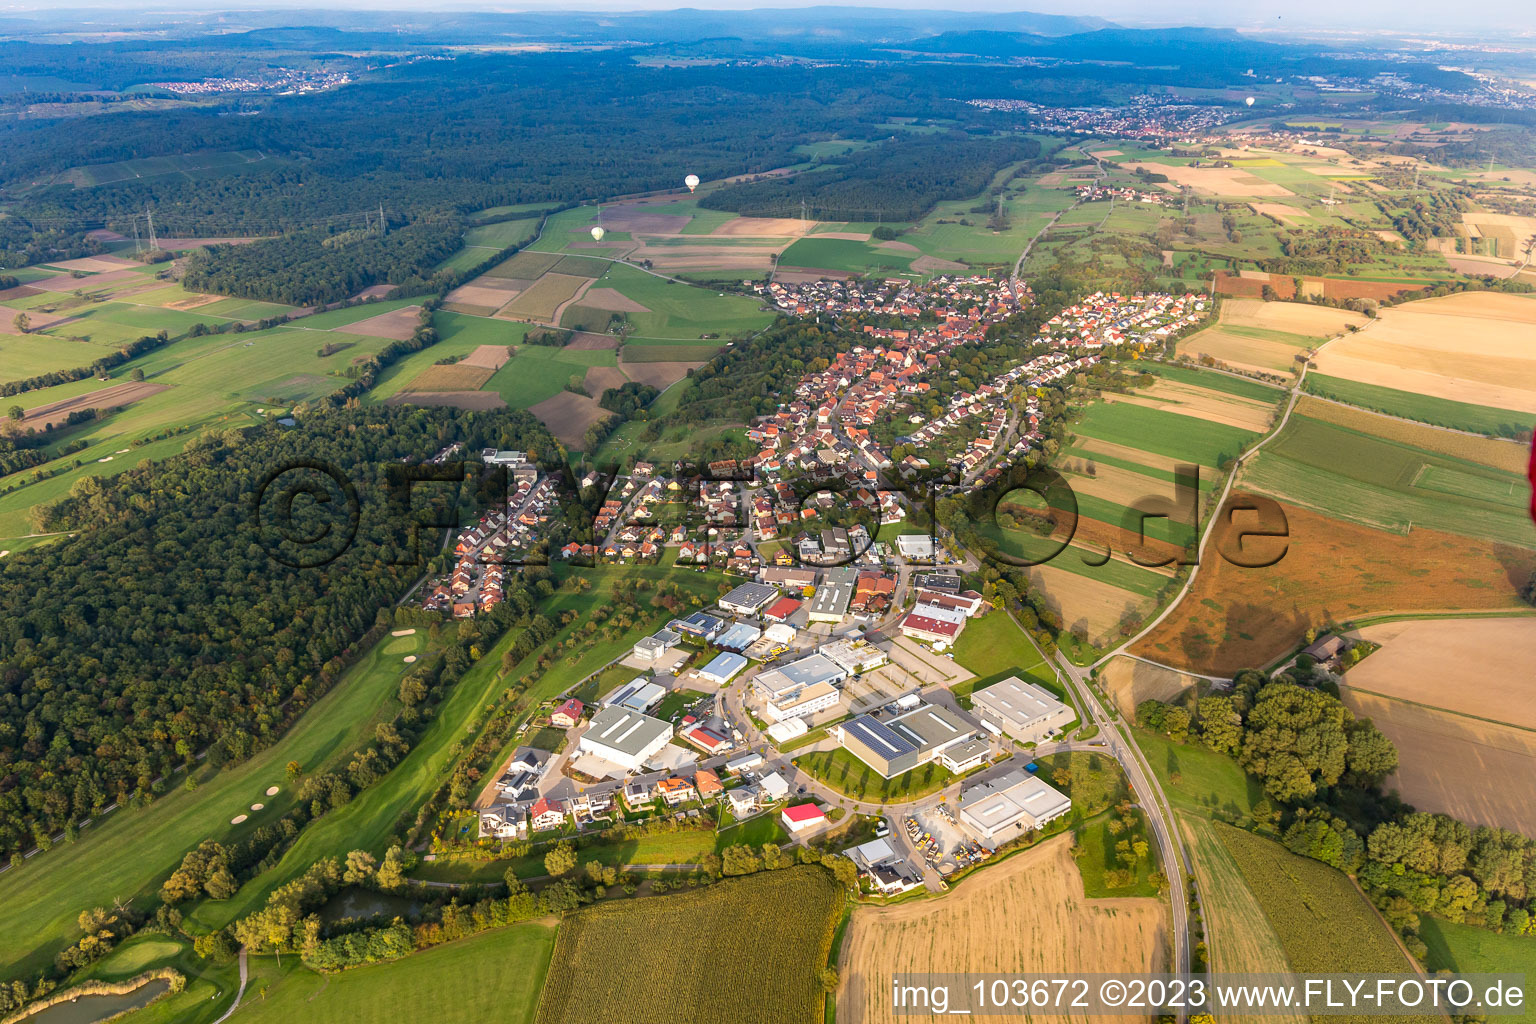 Aerial photograpy of Otto-Hahn-Straße industrial area in the district Dürrn in Ölbronn-Dürrn in the state Baden-Wuerttemberg, Germany